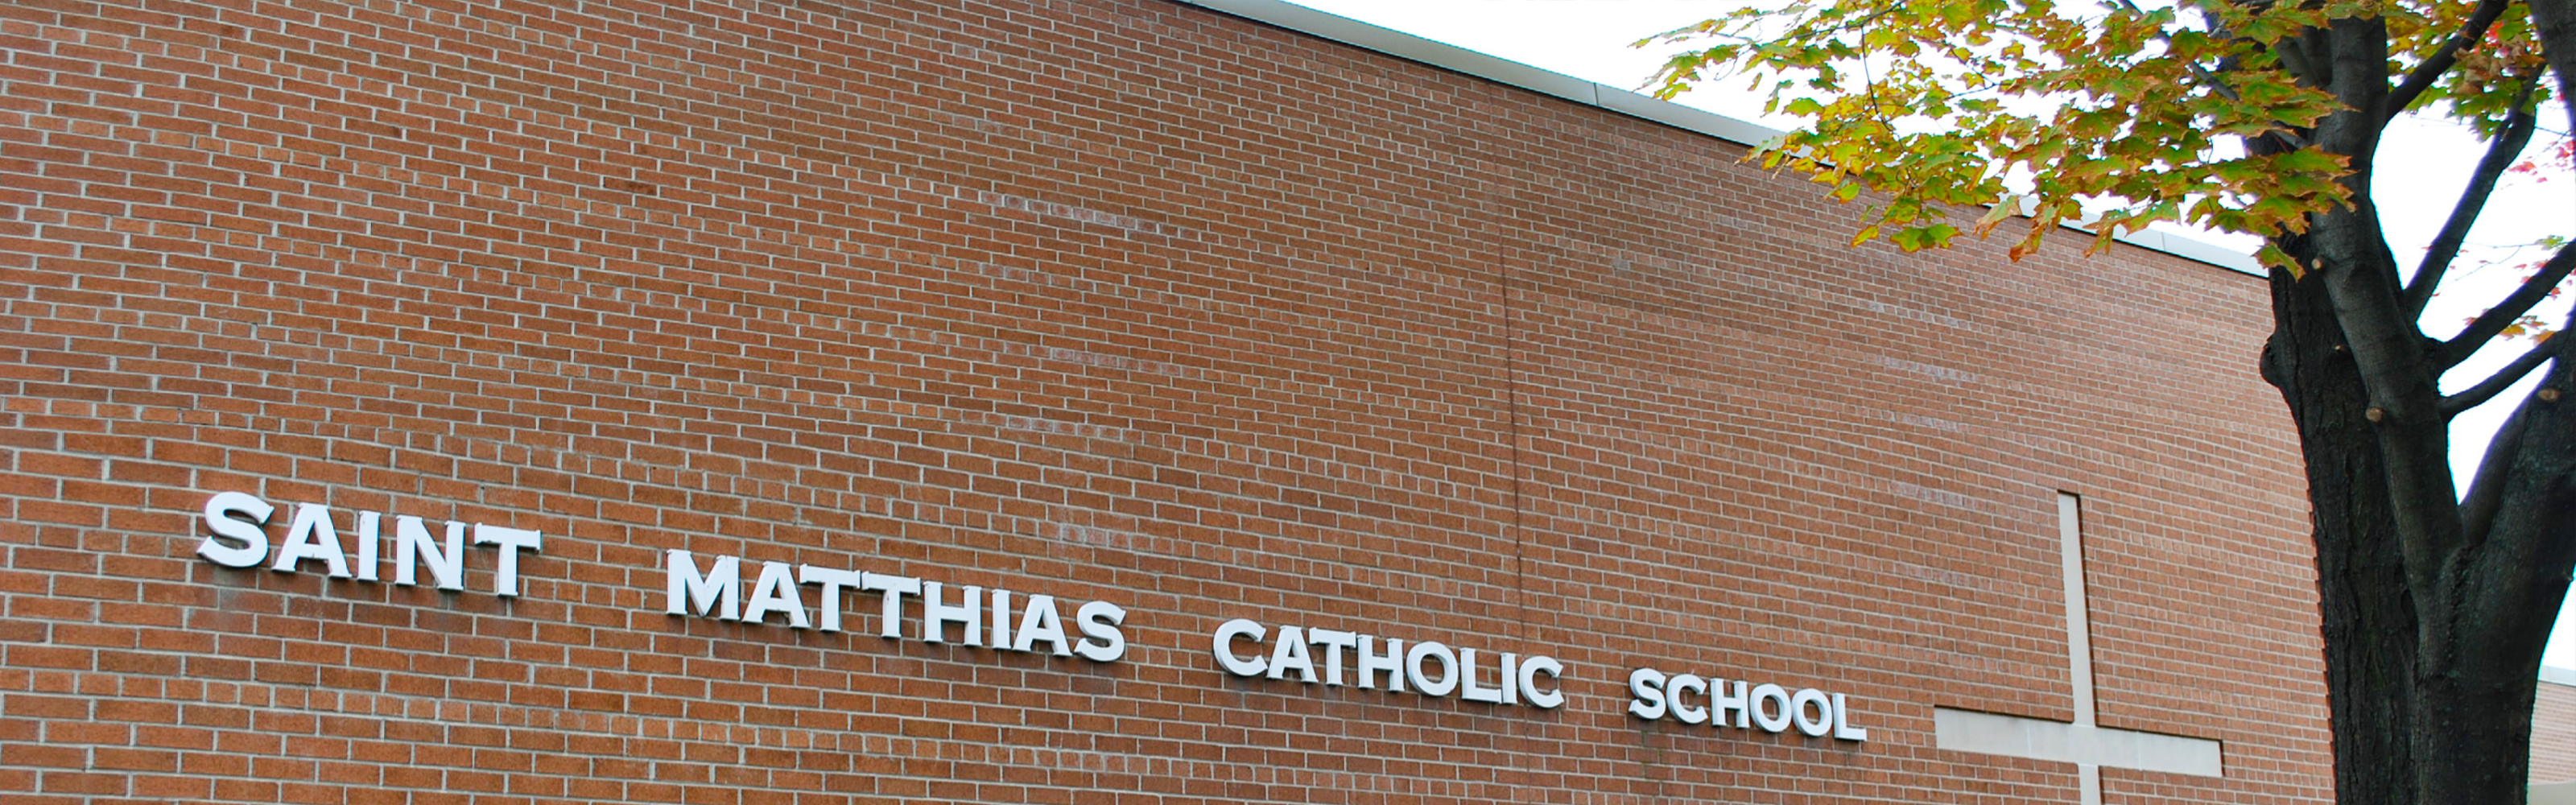 The front of the St. Matthias Catholic School building.